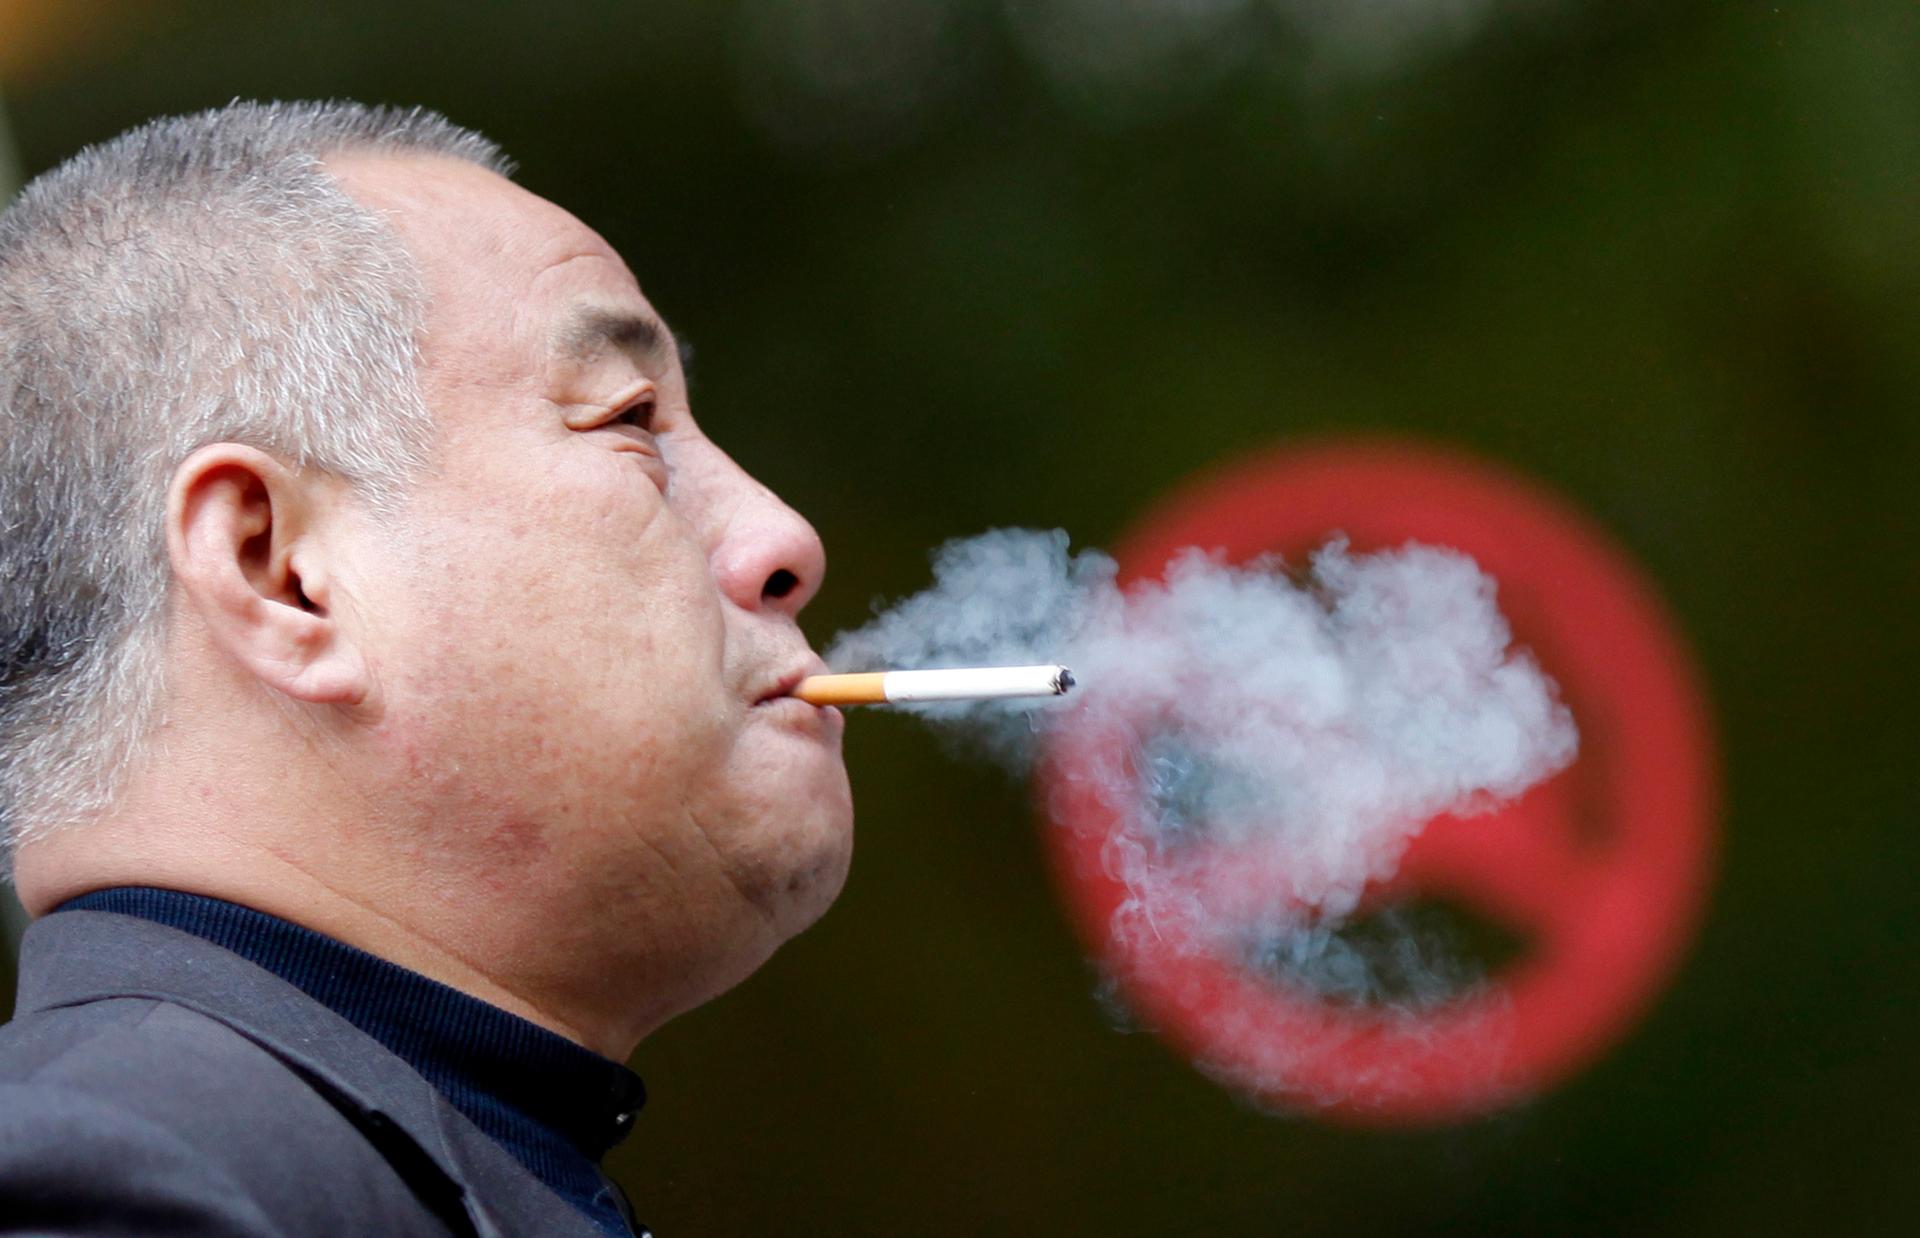 A man smokes next to a "No Smoking" sign in downtown Shanghai. Chinese leaders are now banned from smoking in public.